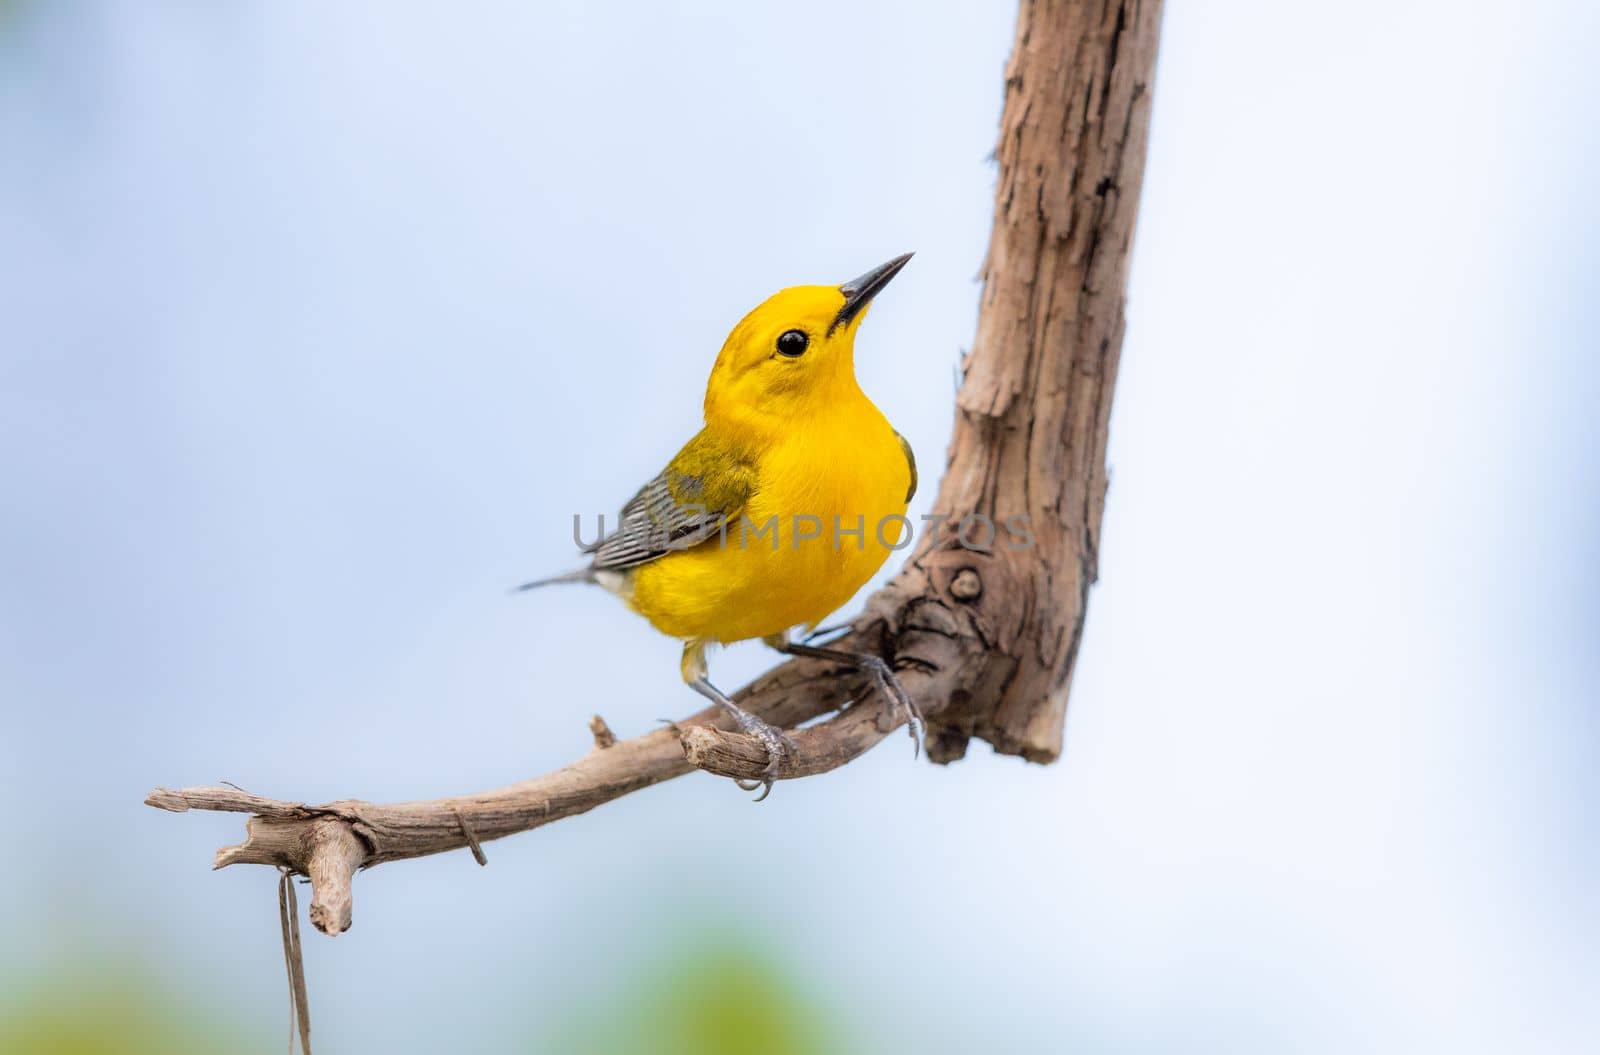 Prothonotary Warbler perched on a tree during migration season in Canada